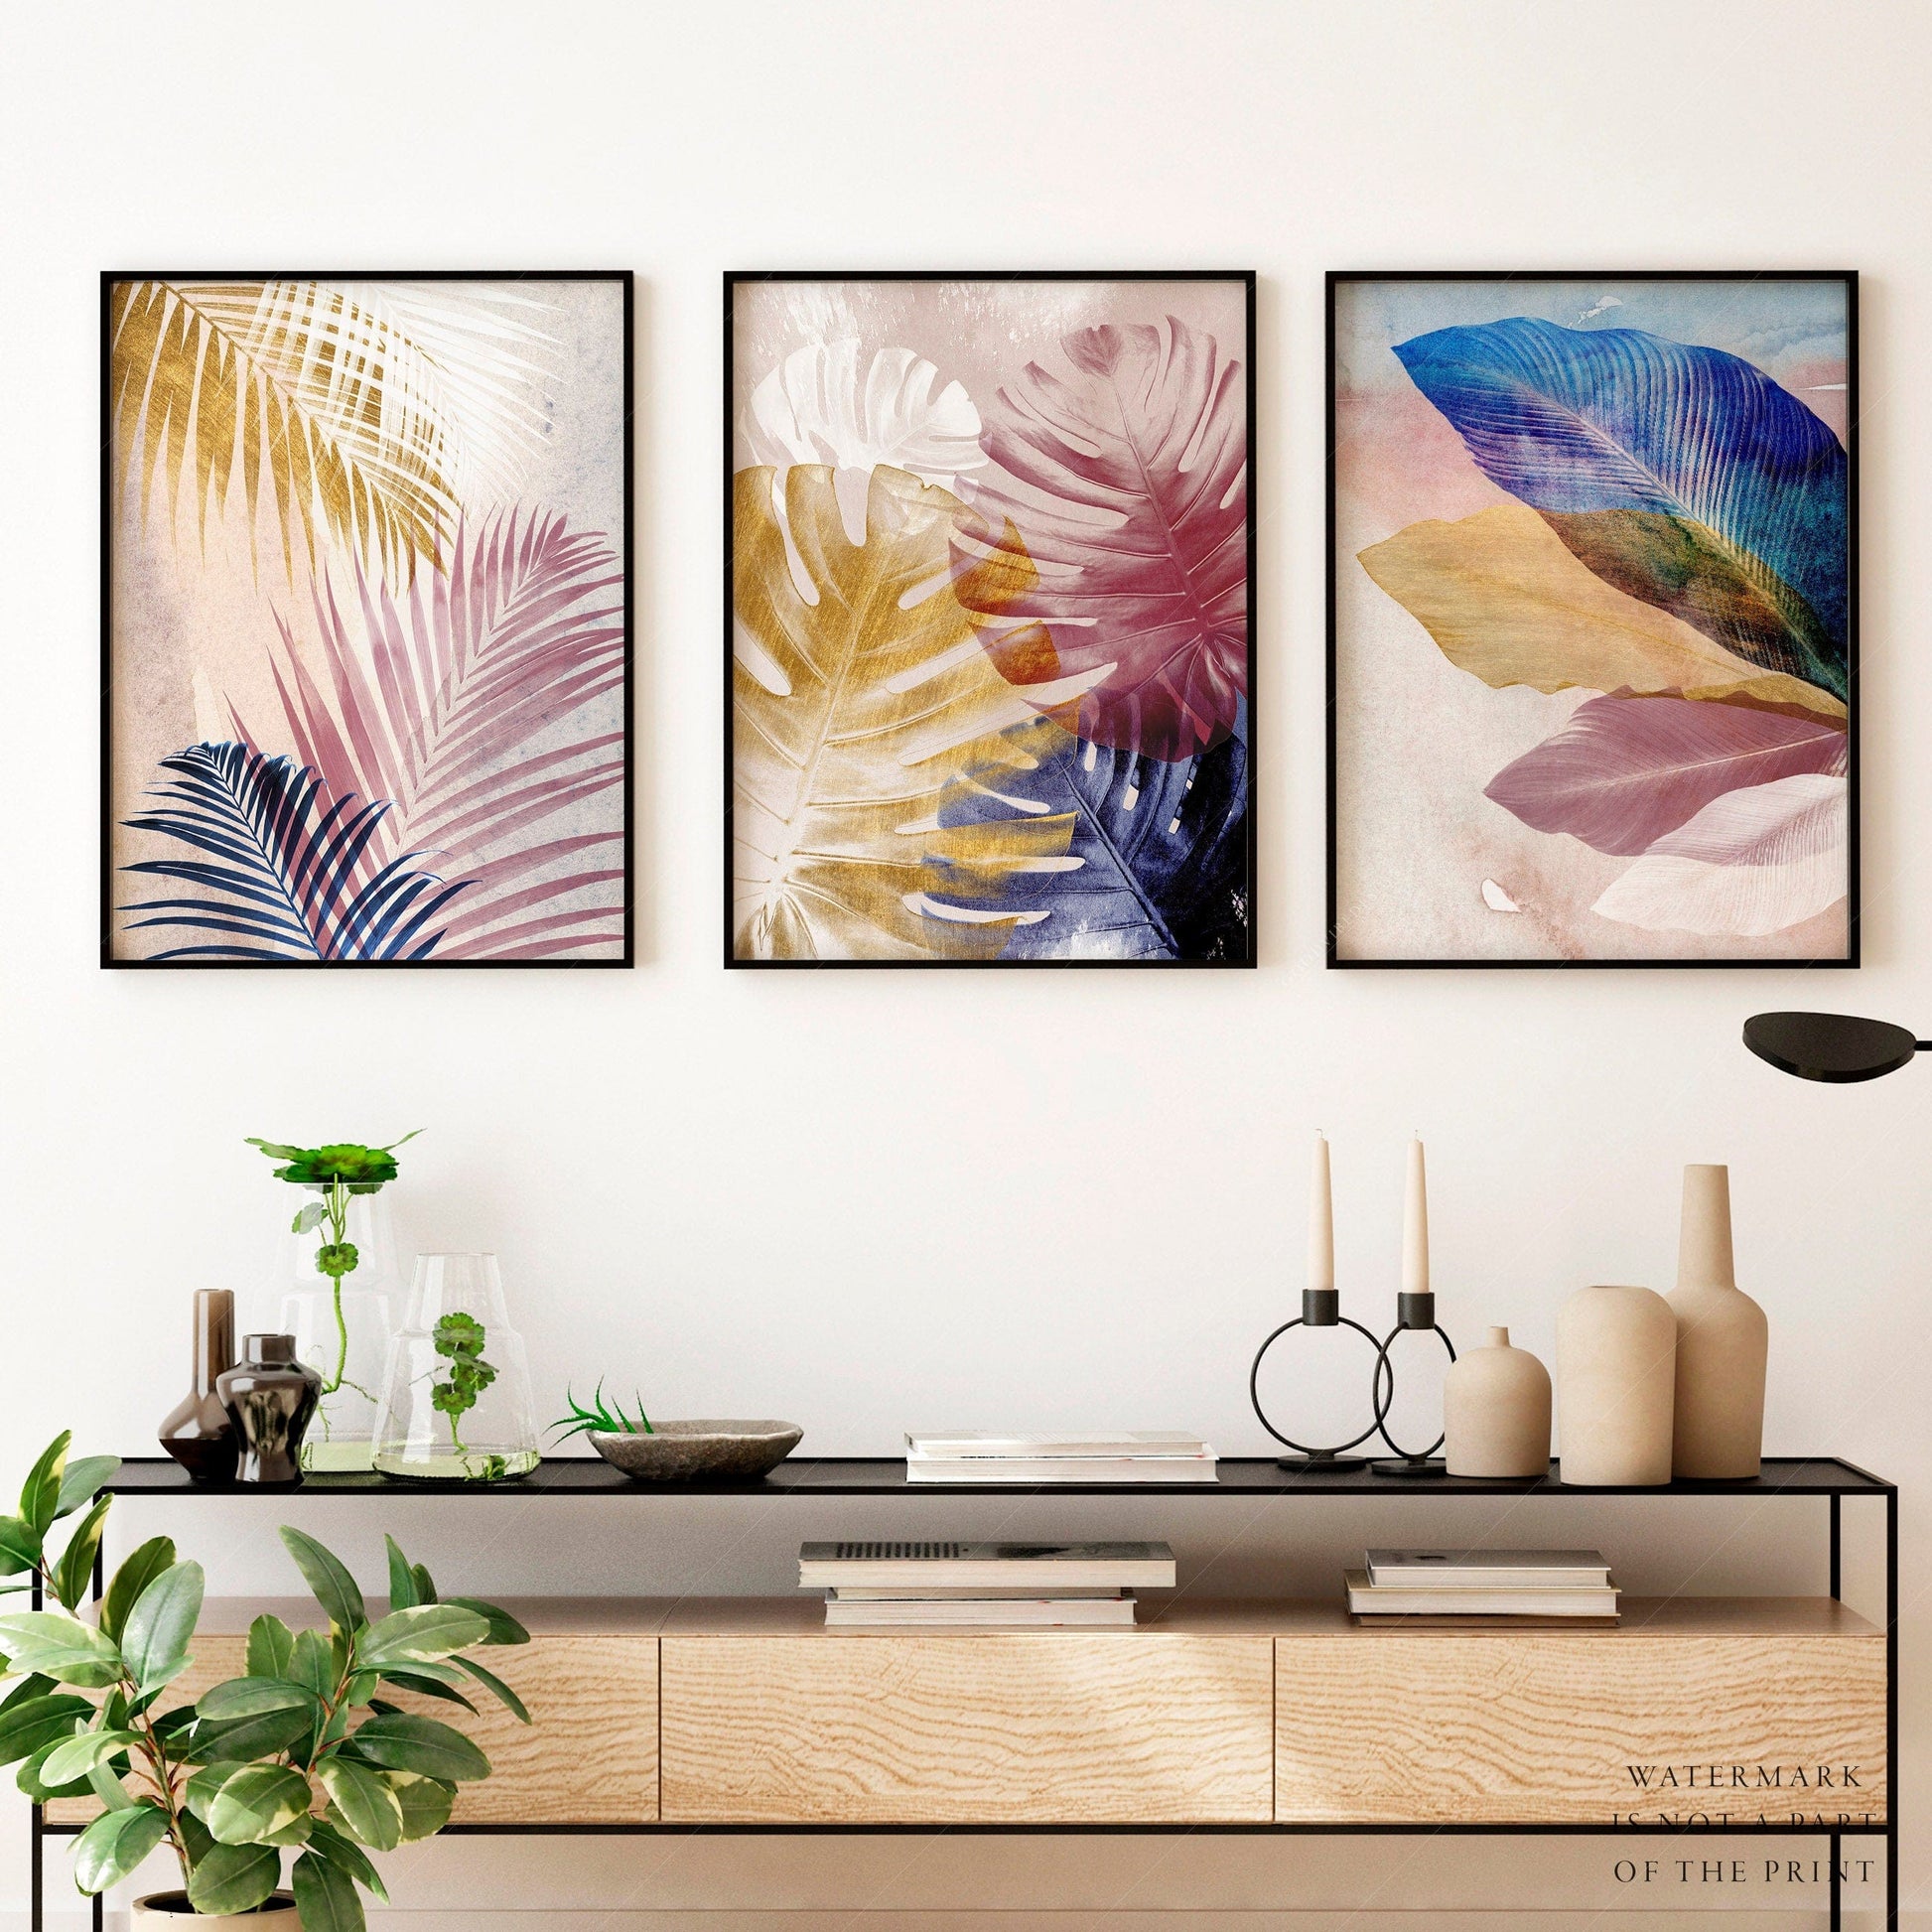 Home Poster Decor Set of 3 Wall Art, Botanical Prints, Navy Blue Leaf, Blush Pink Decor, Abstract Watercolor, Tropical Poster, Plant Prints, Up to 44x66"